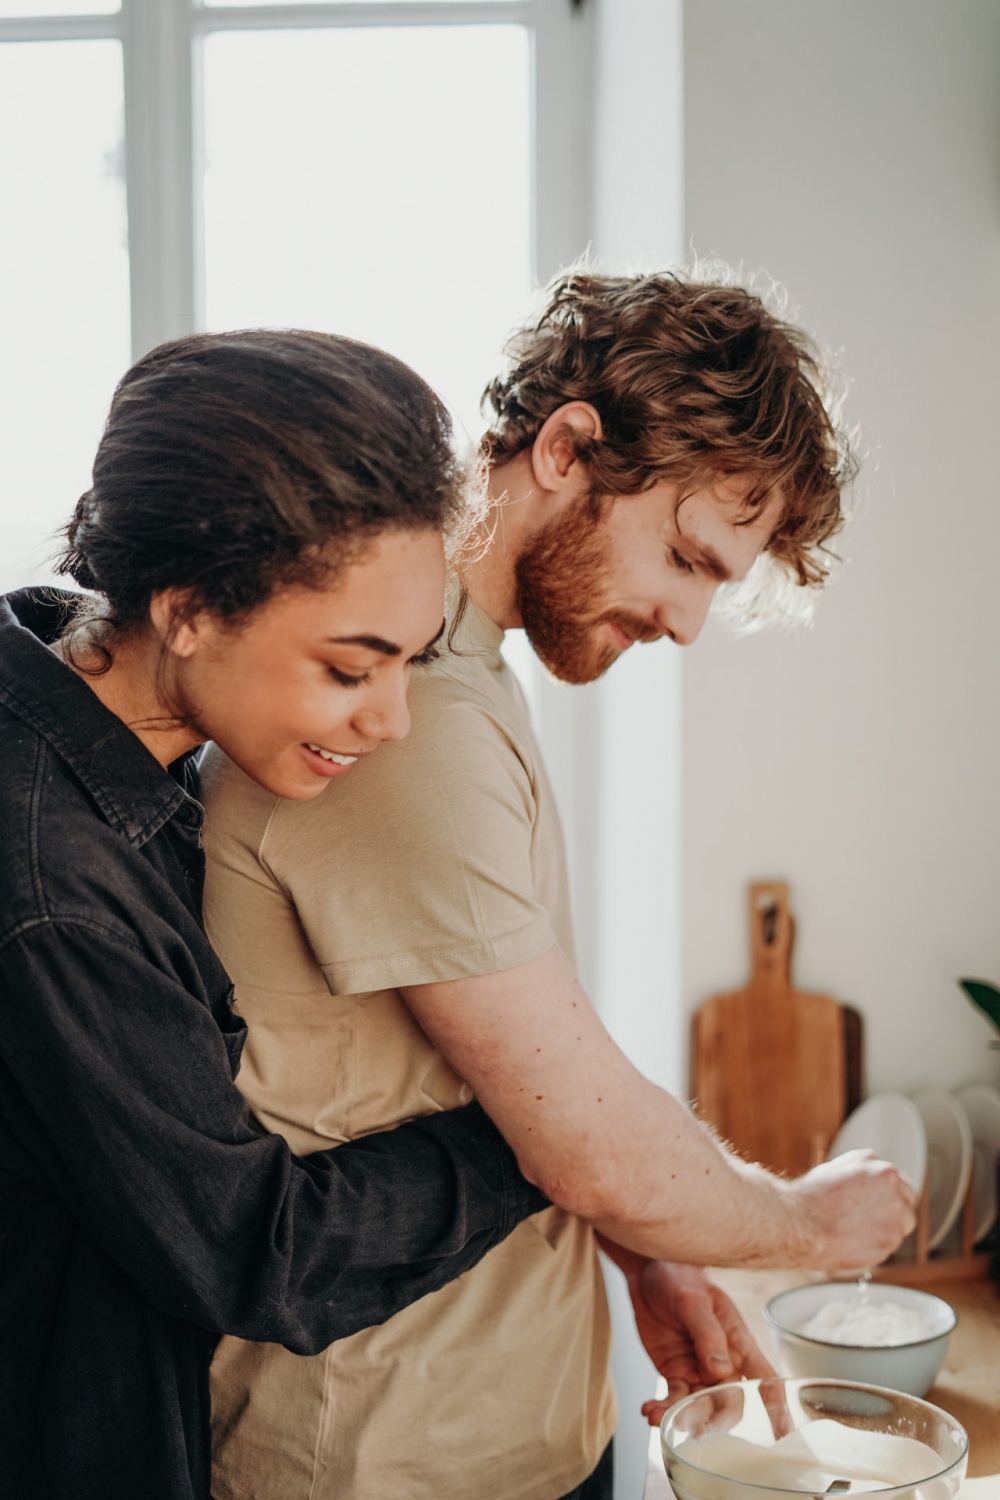 5 Ways to Improve Your Relationship From Home